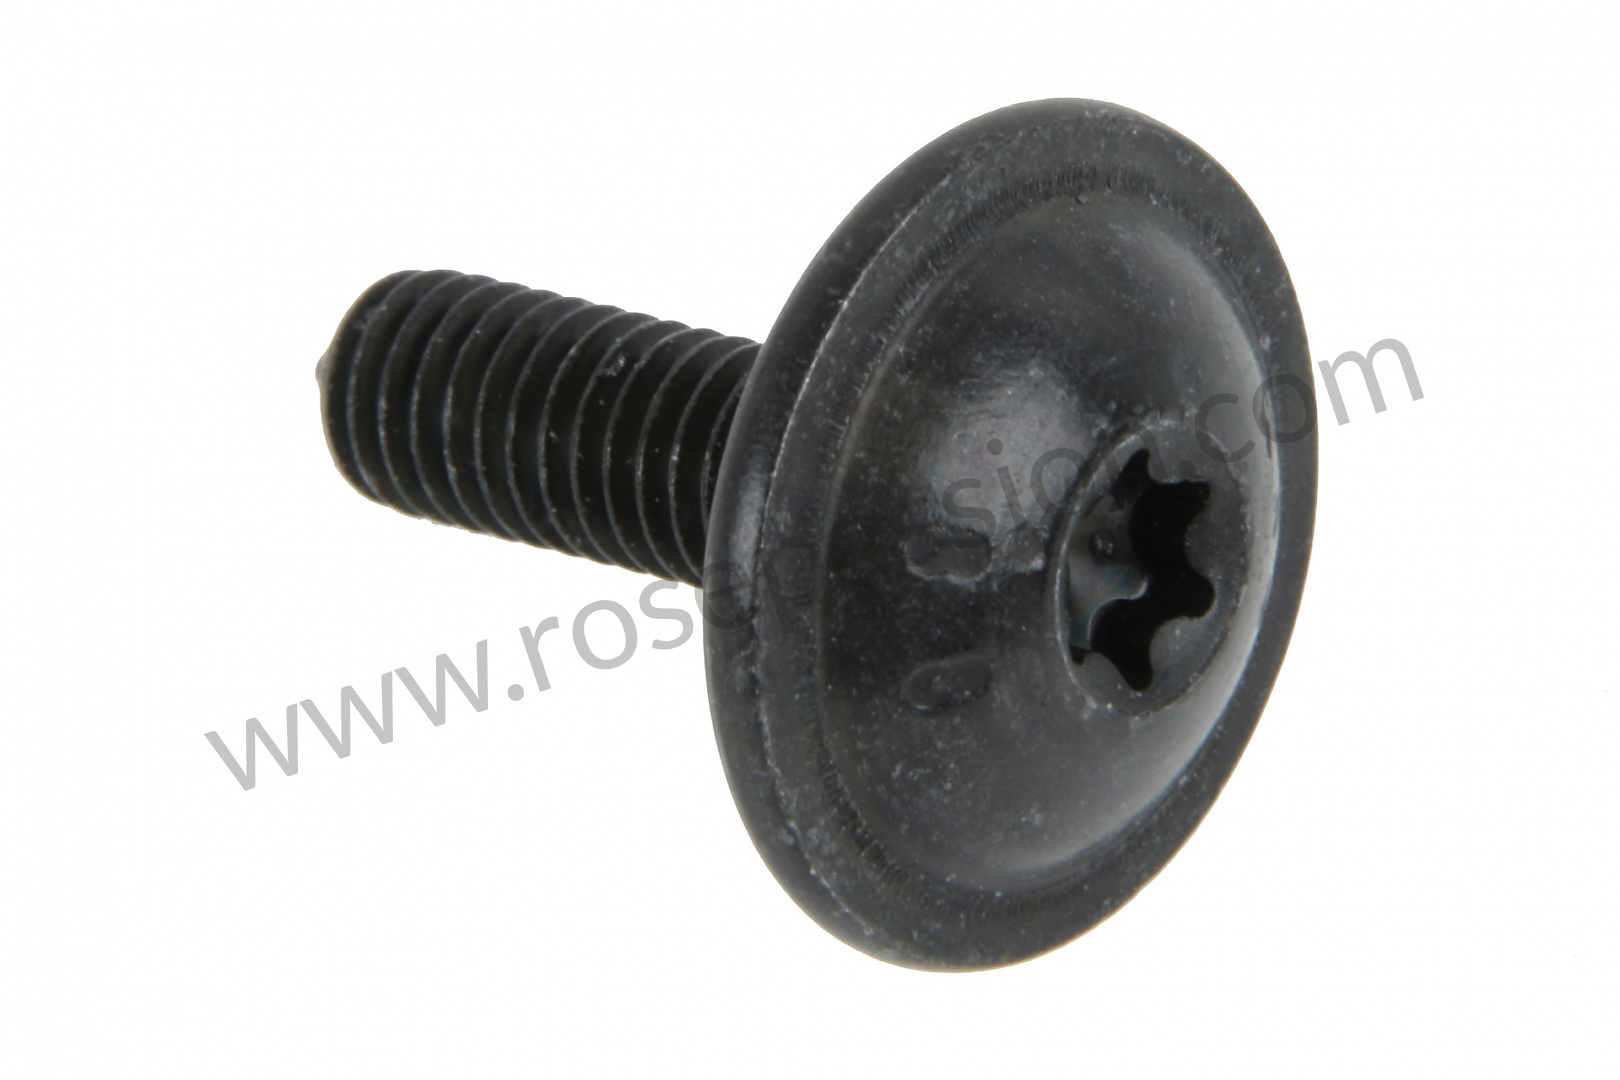 P156223 - N91188301 - Outer hexagon round screw (9A791188301) for 